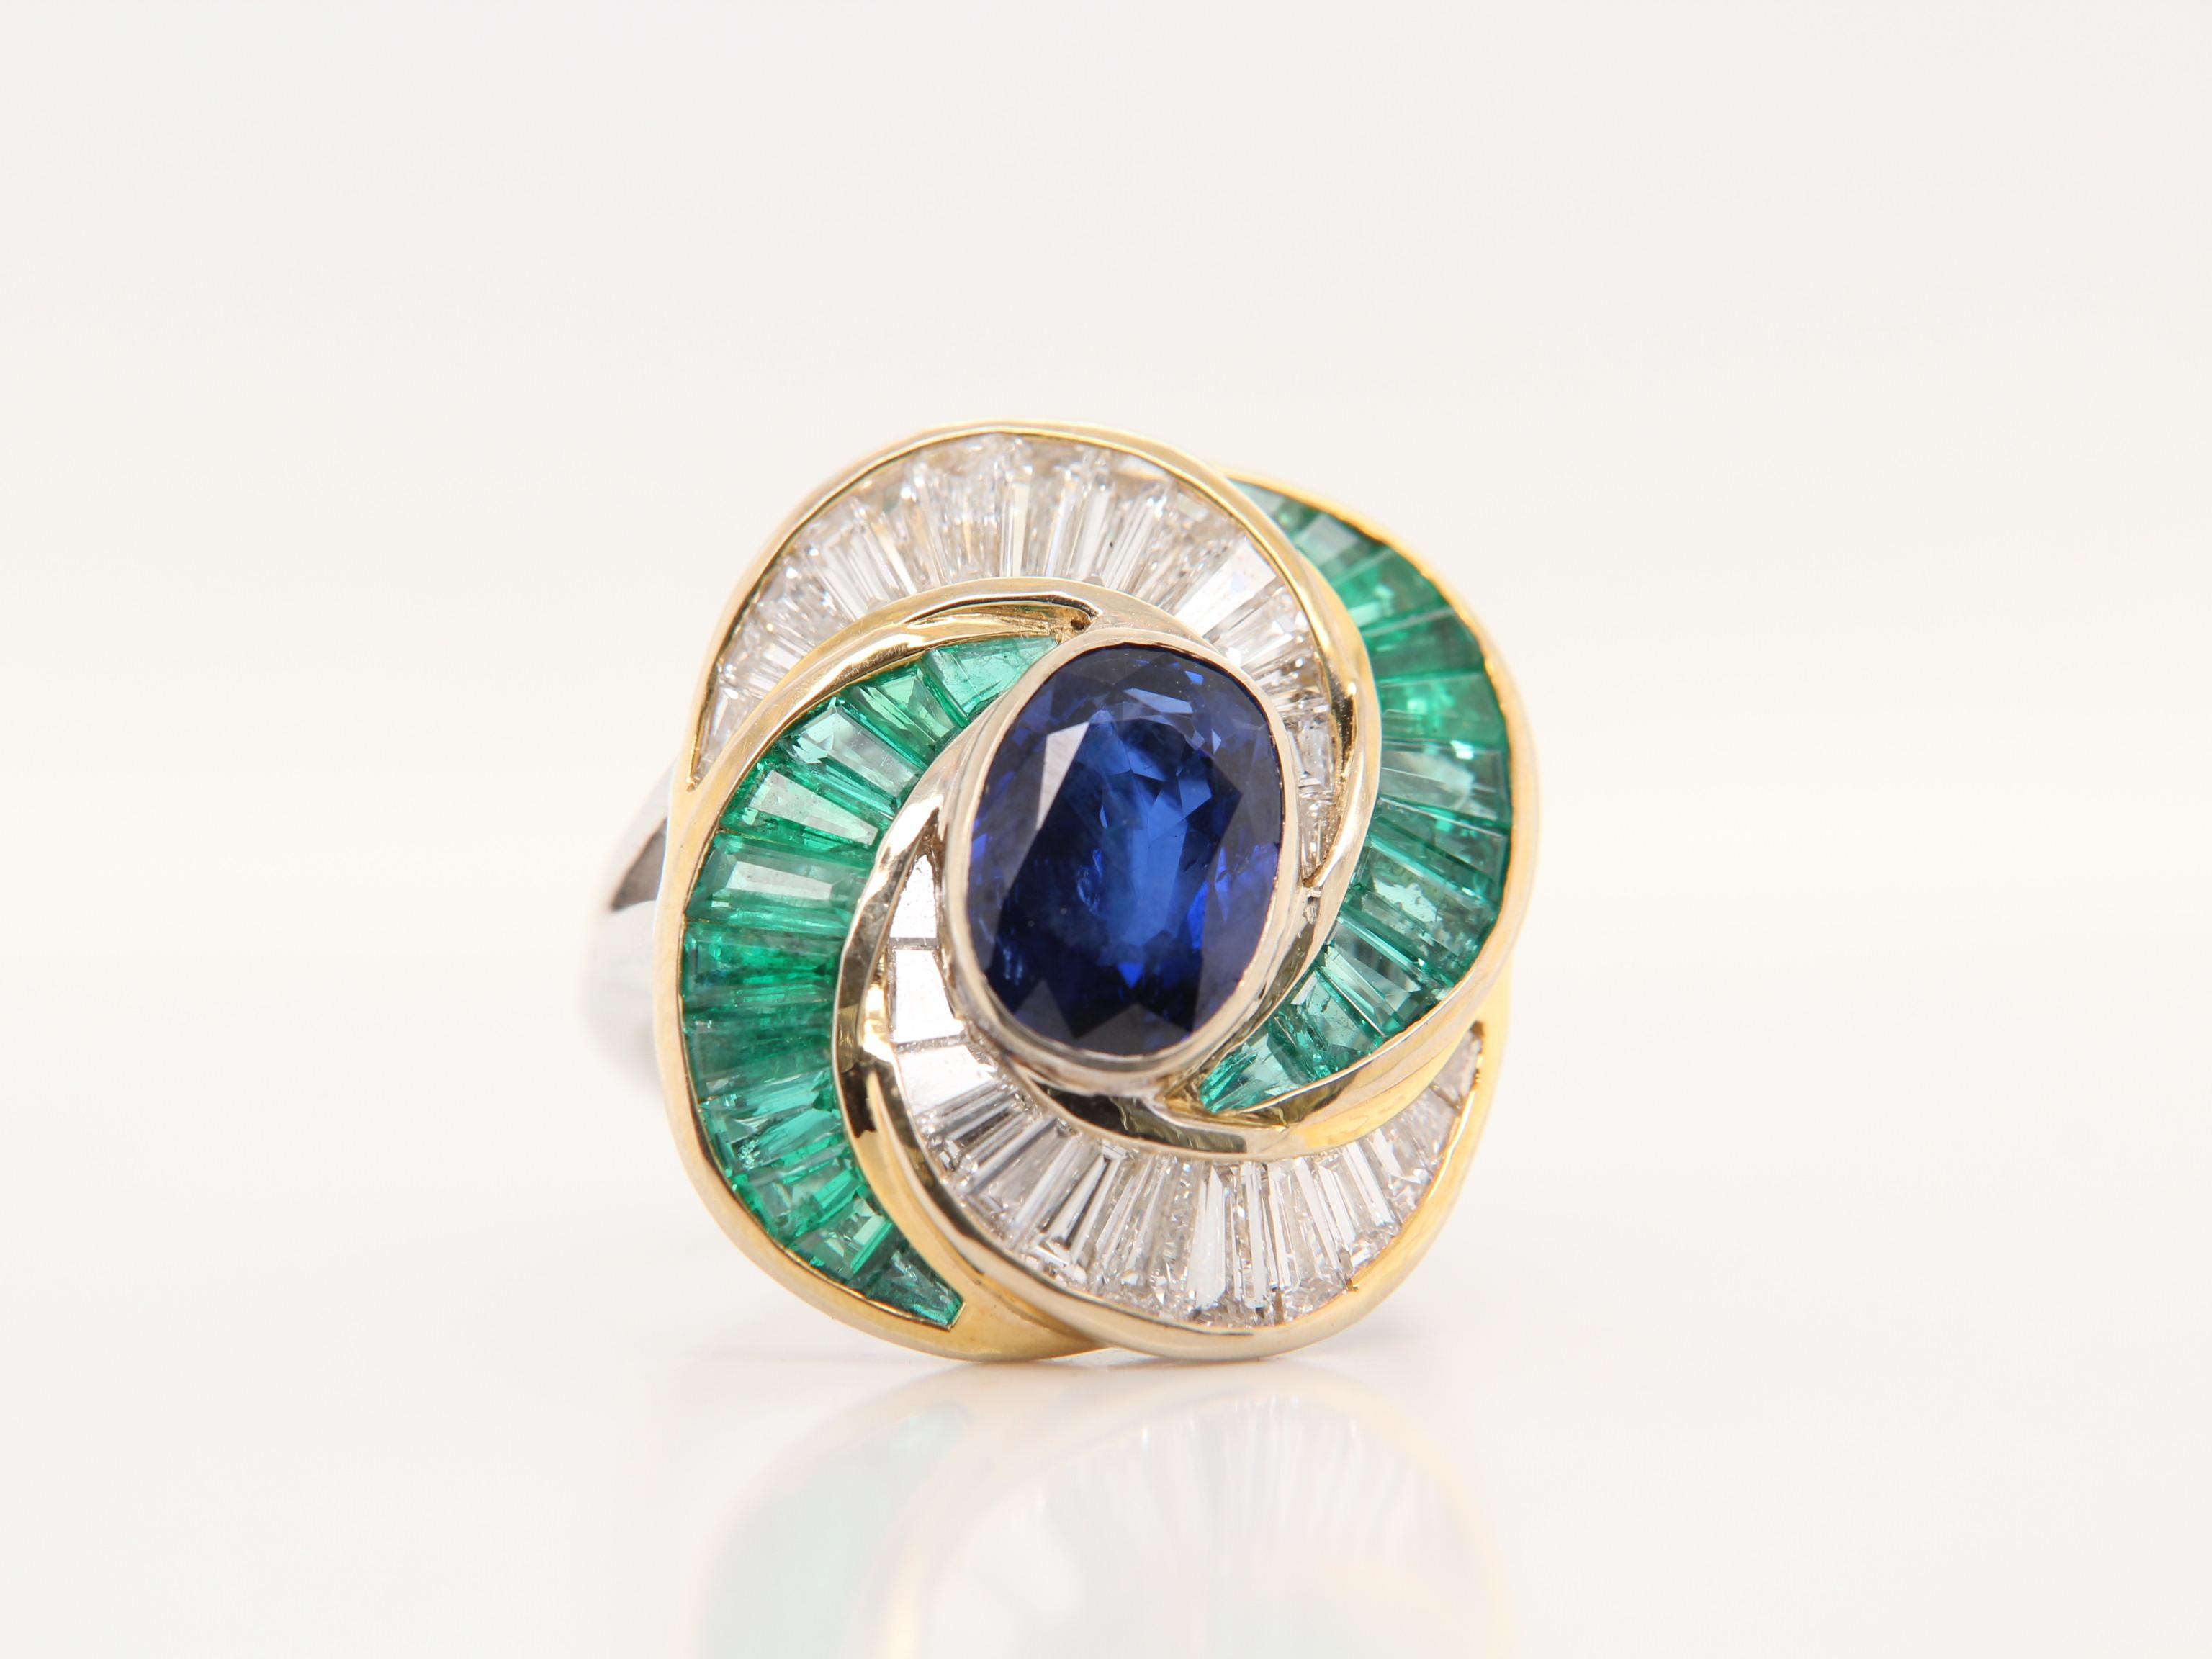 A brand new blue sapphire ring. The ring's center stone is 3.01 carat Burmese blue sapphire certified by Gubeline Gem Lab as natural, unheated, 'Blue' with the certificate number: 15060046

The stone was unearthed from Burma - one of the oldest blue